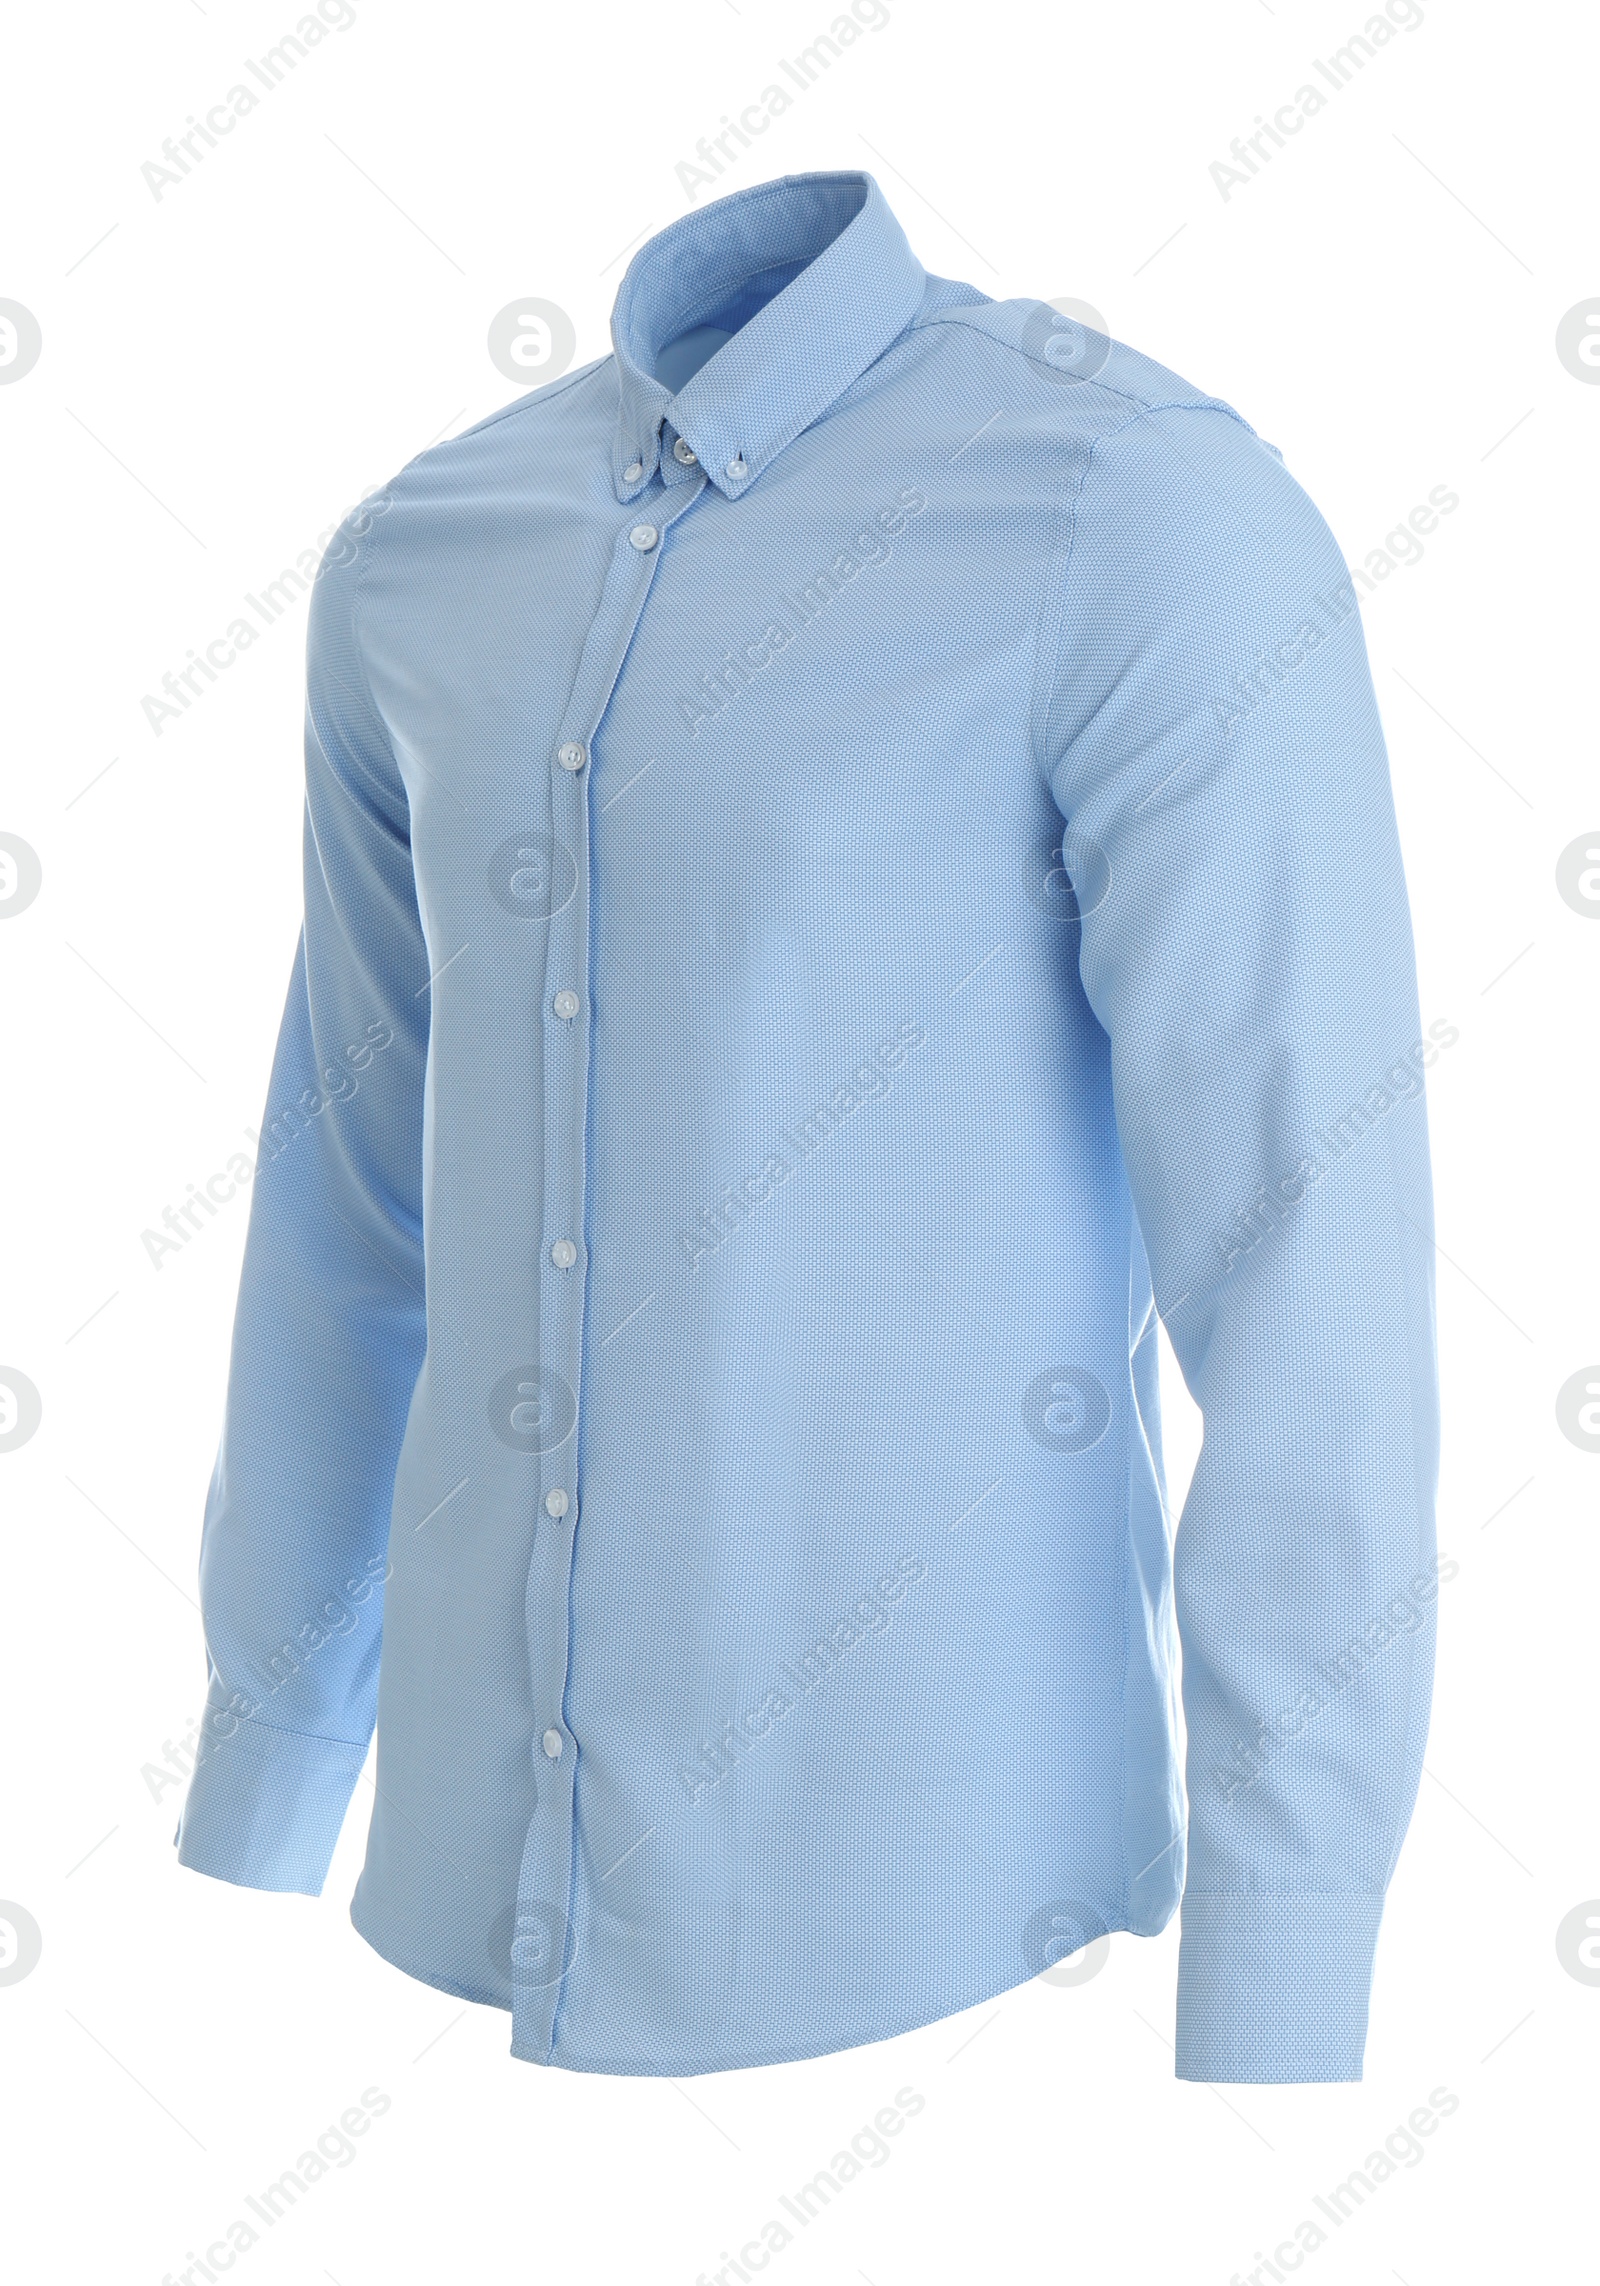 Photo of Stylish shirt on mannequin against white background. Men's clothes